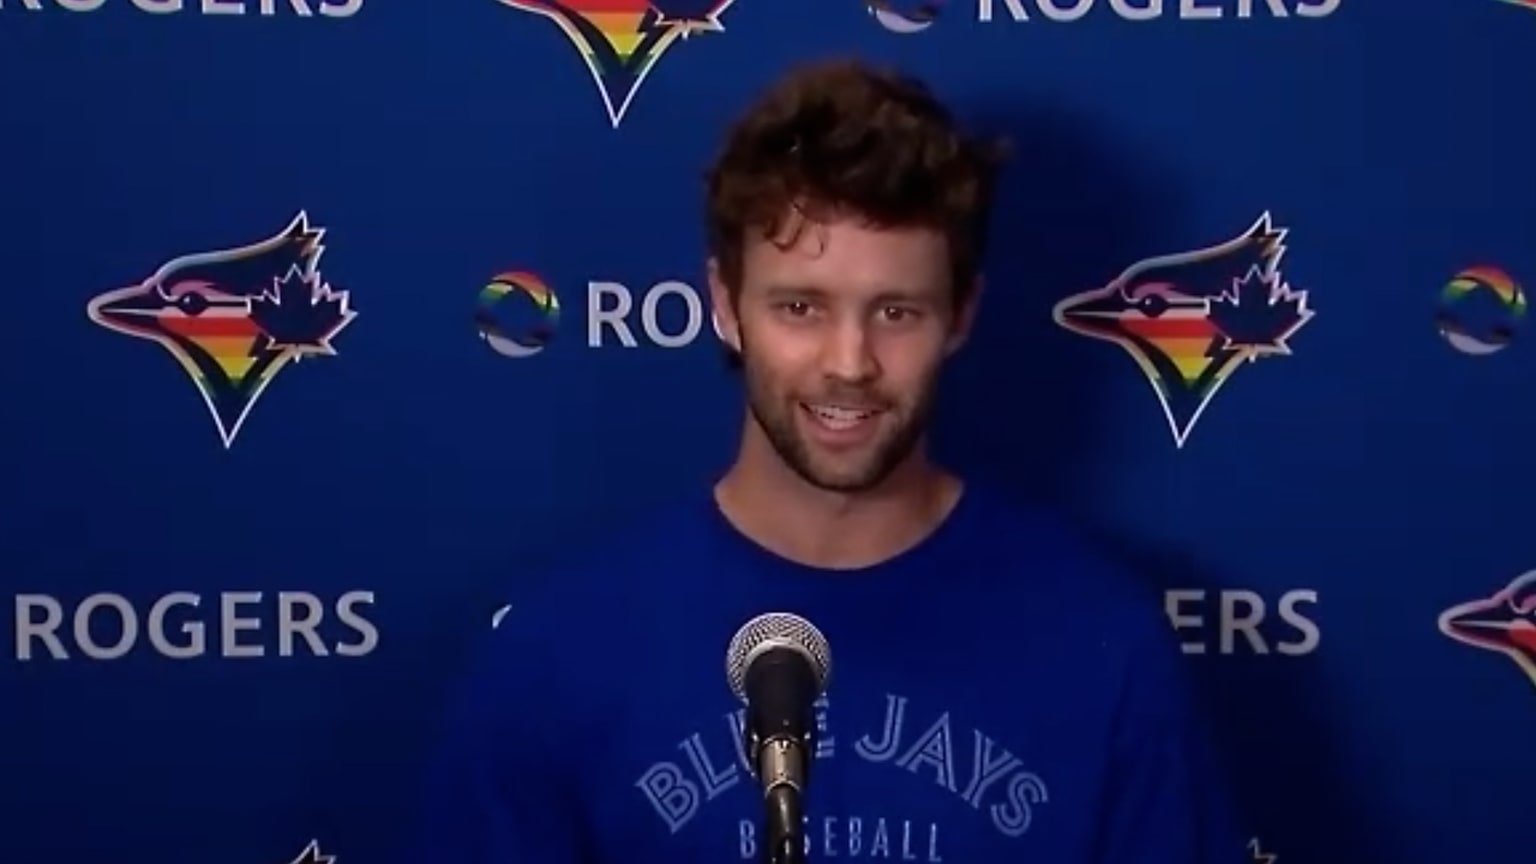 Adam Cimber Reacts to Being Traded to Toronto Blue Jays from